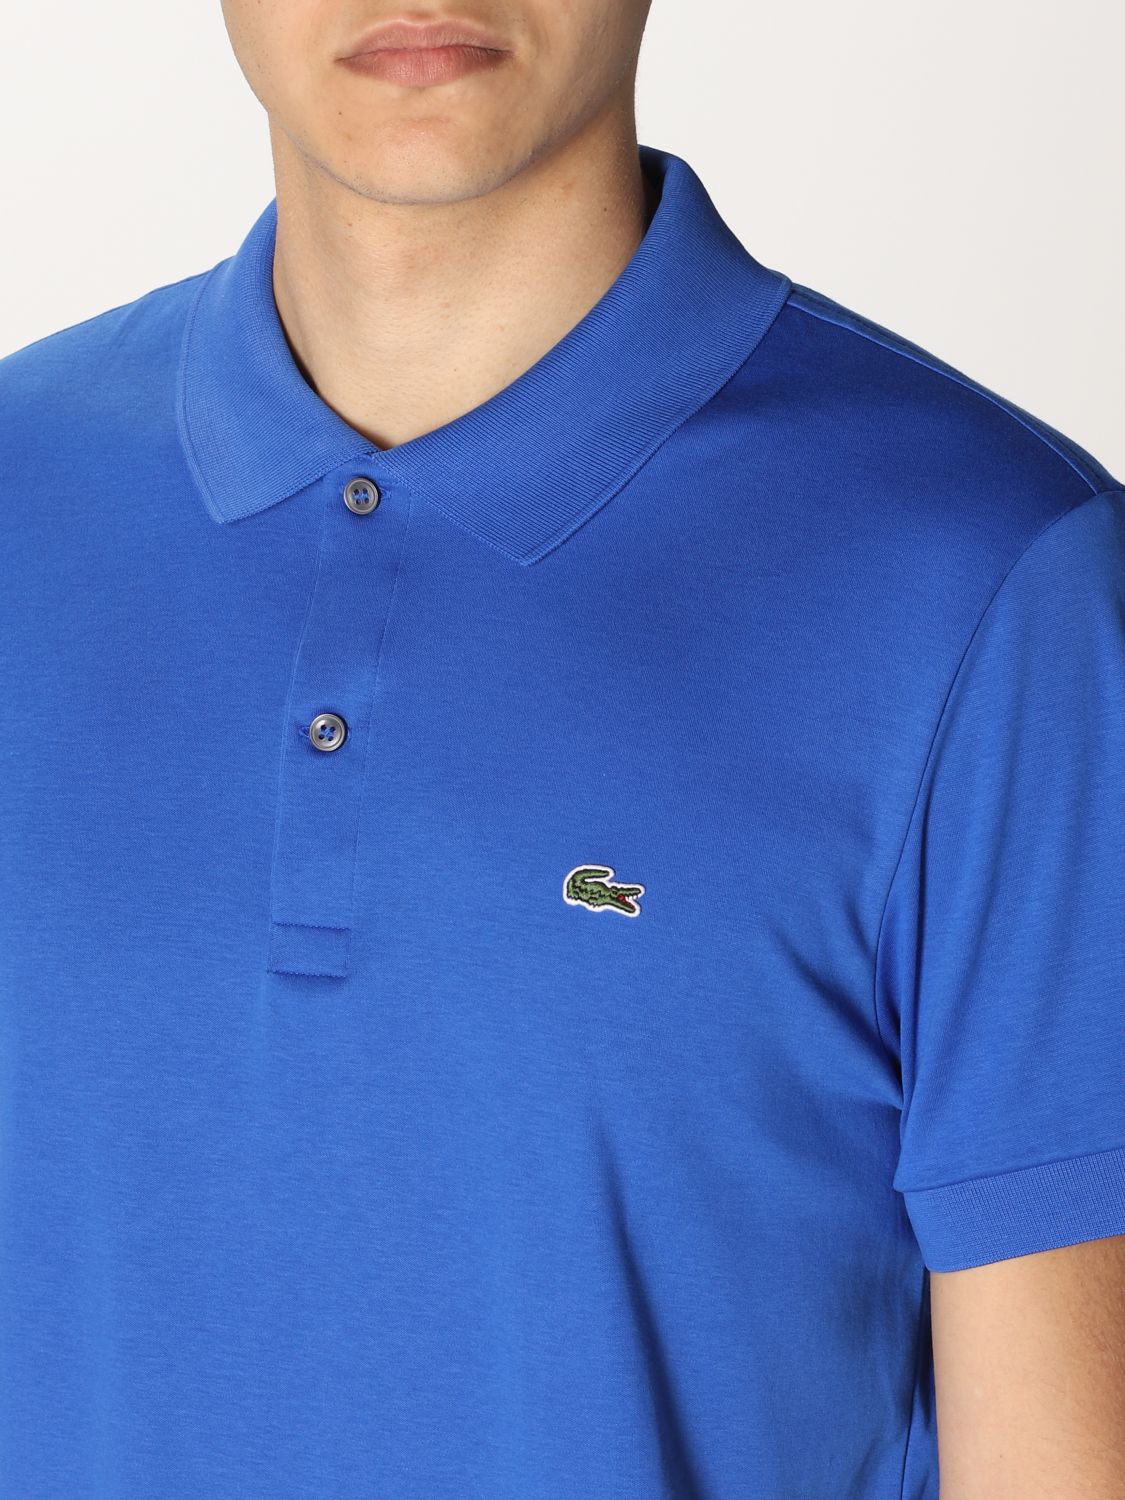 polo shirts for men blue